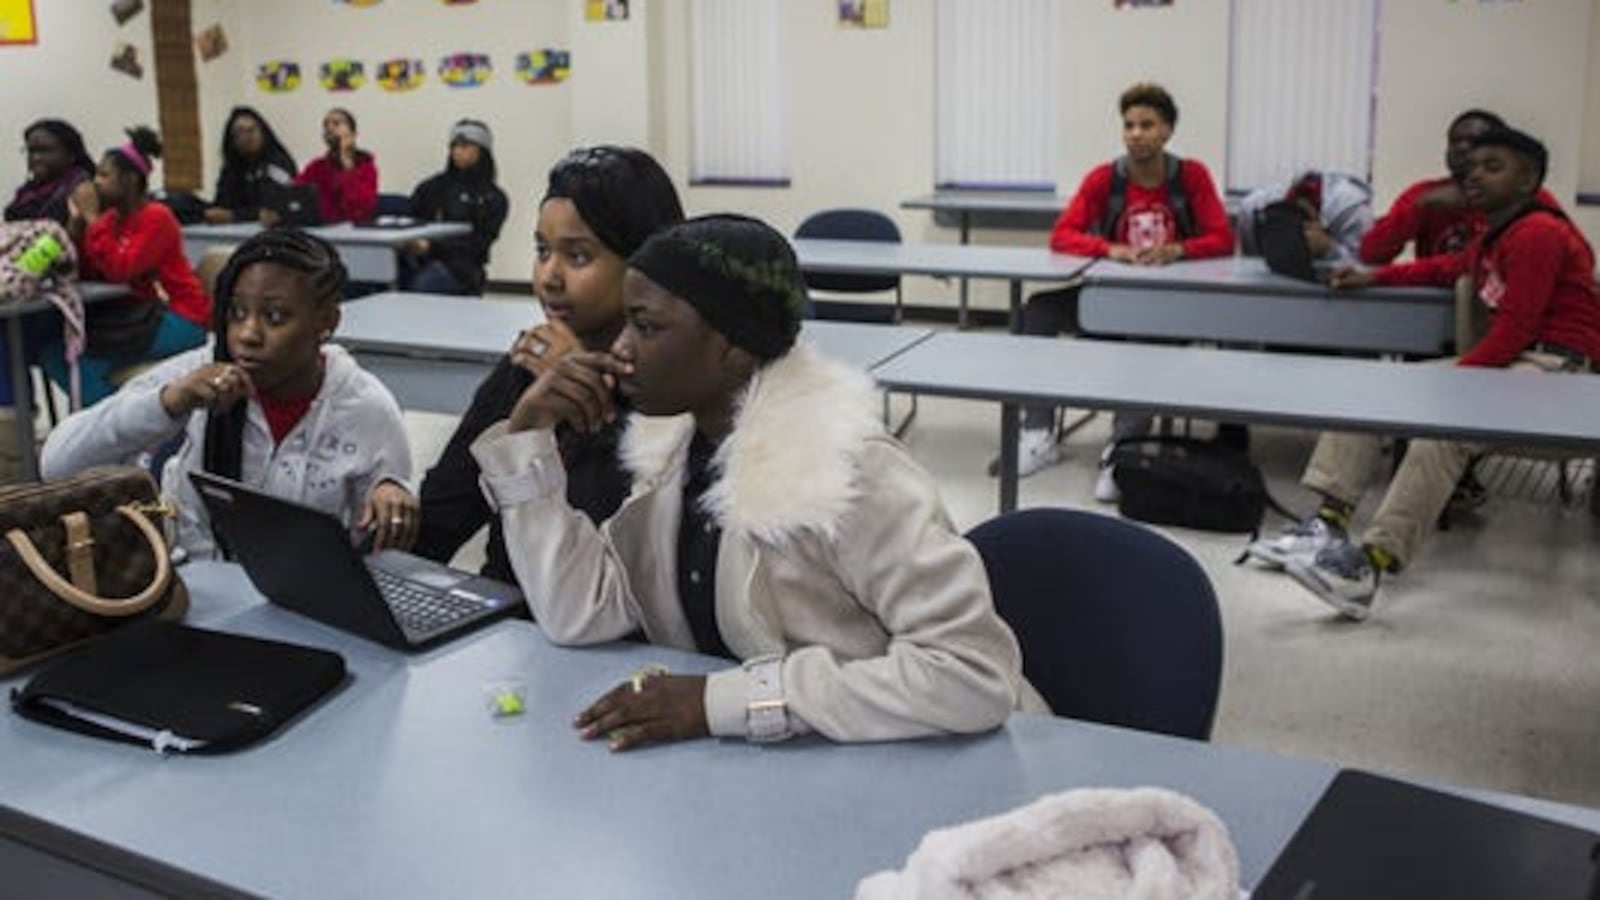 Southwest Early College High School enrolled 99 students during its first year, according to state data. Its latest scores on the state exam fell below district averages, and it had received a good rating from Shelby County Schools in the district’s own report card.